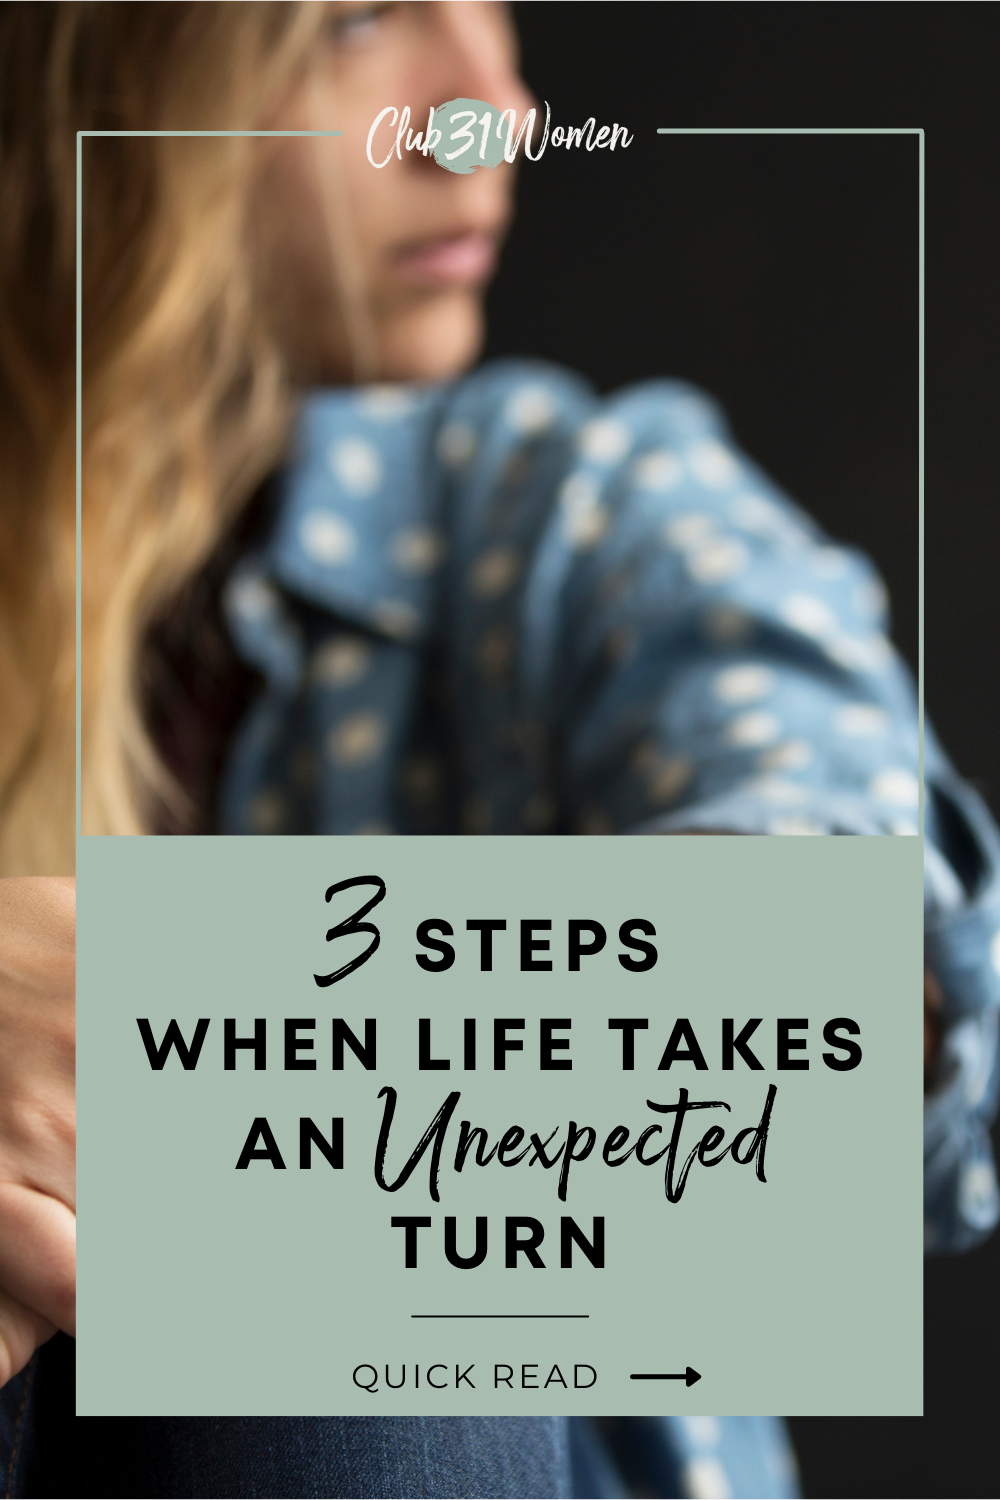 Life doesn't tend to go the way we planned at times. What can we do when it takes an unexpected turn and we weren't prepared for it? via @Club31Women